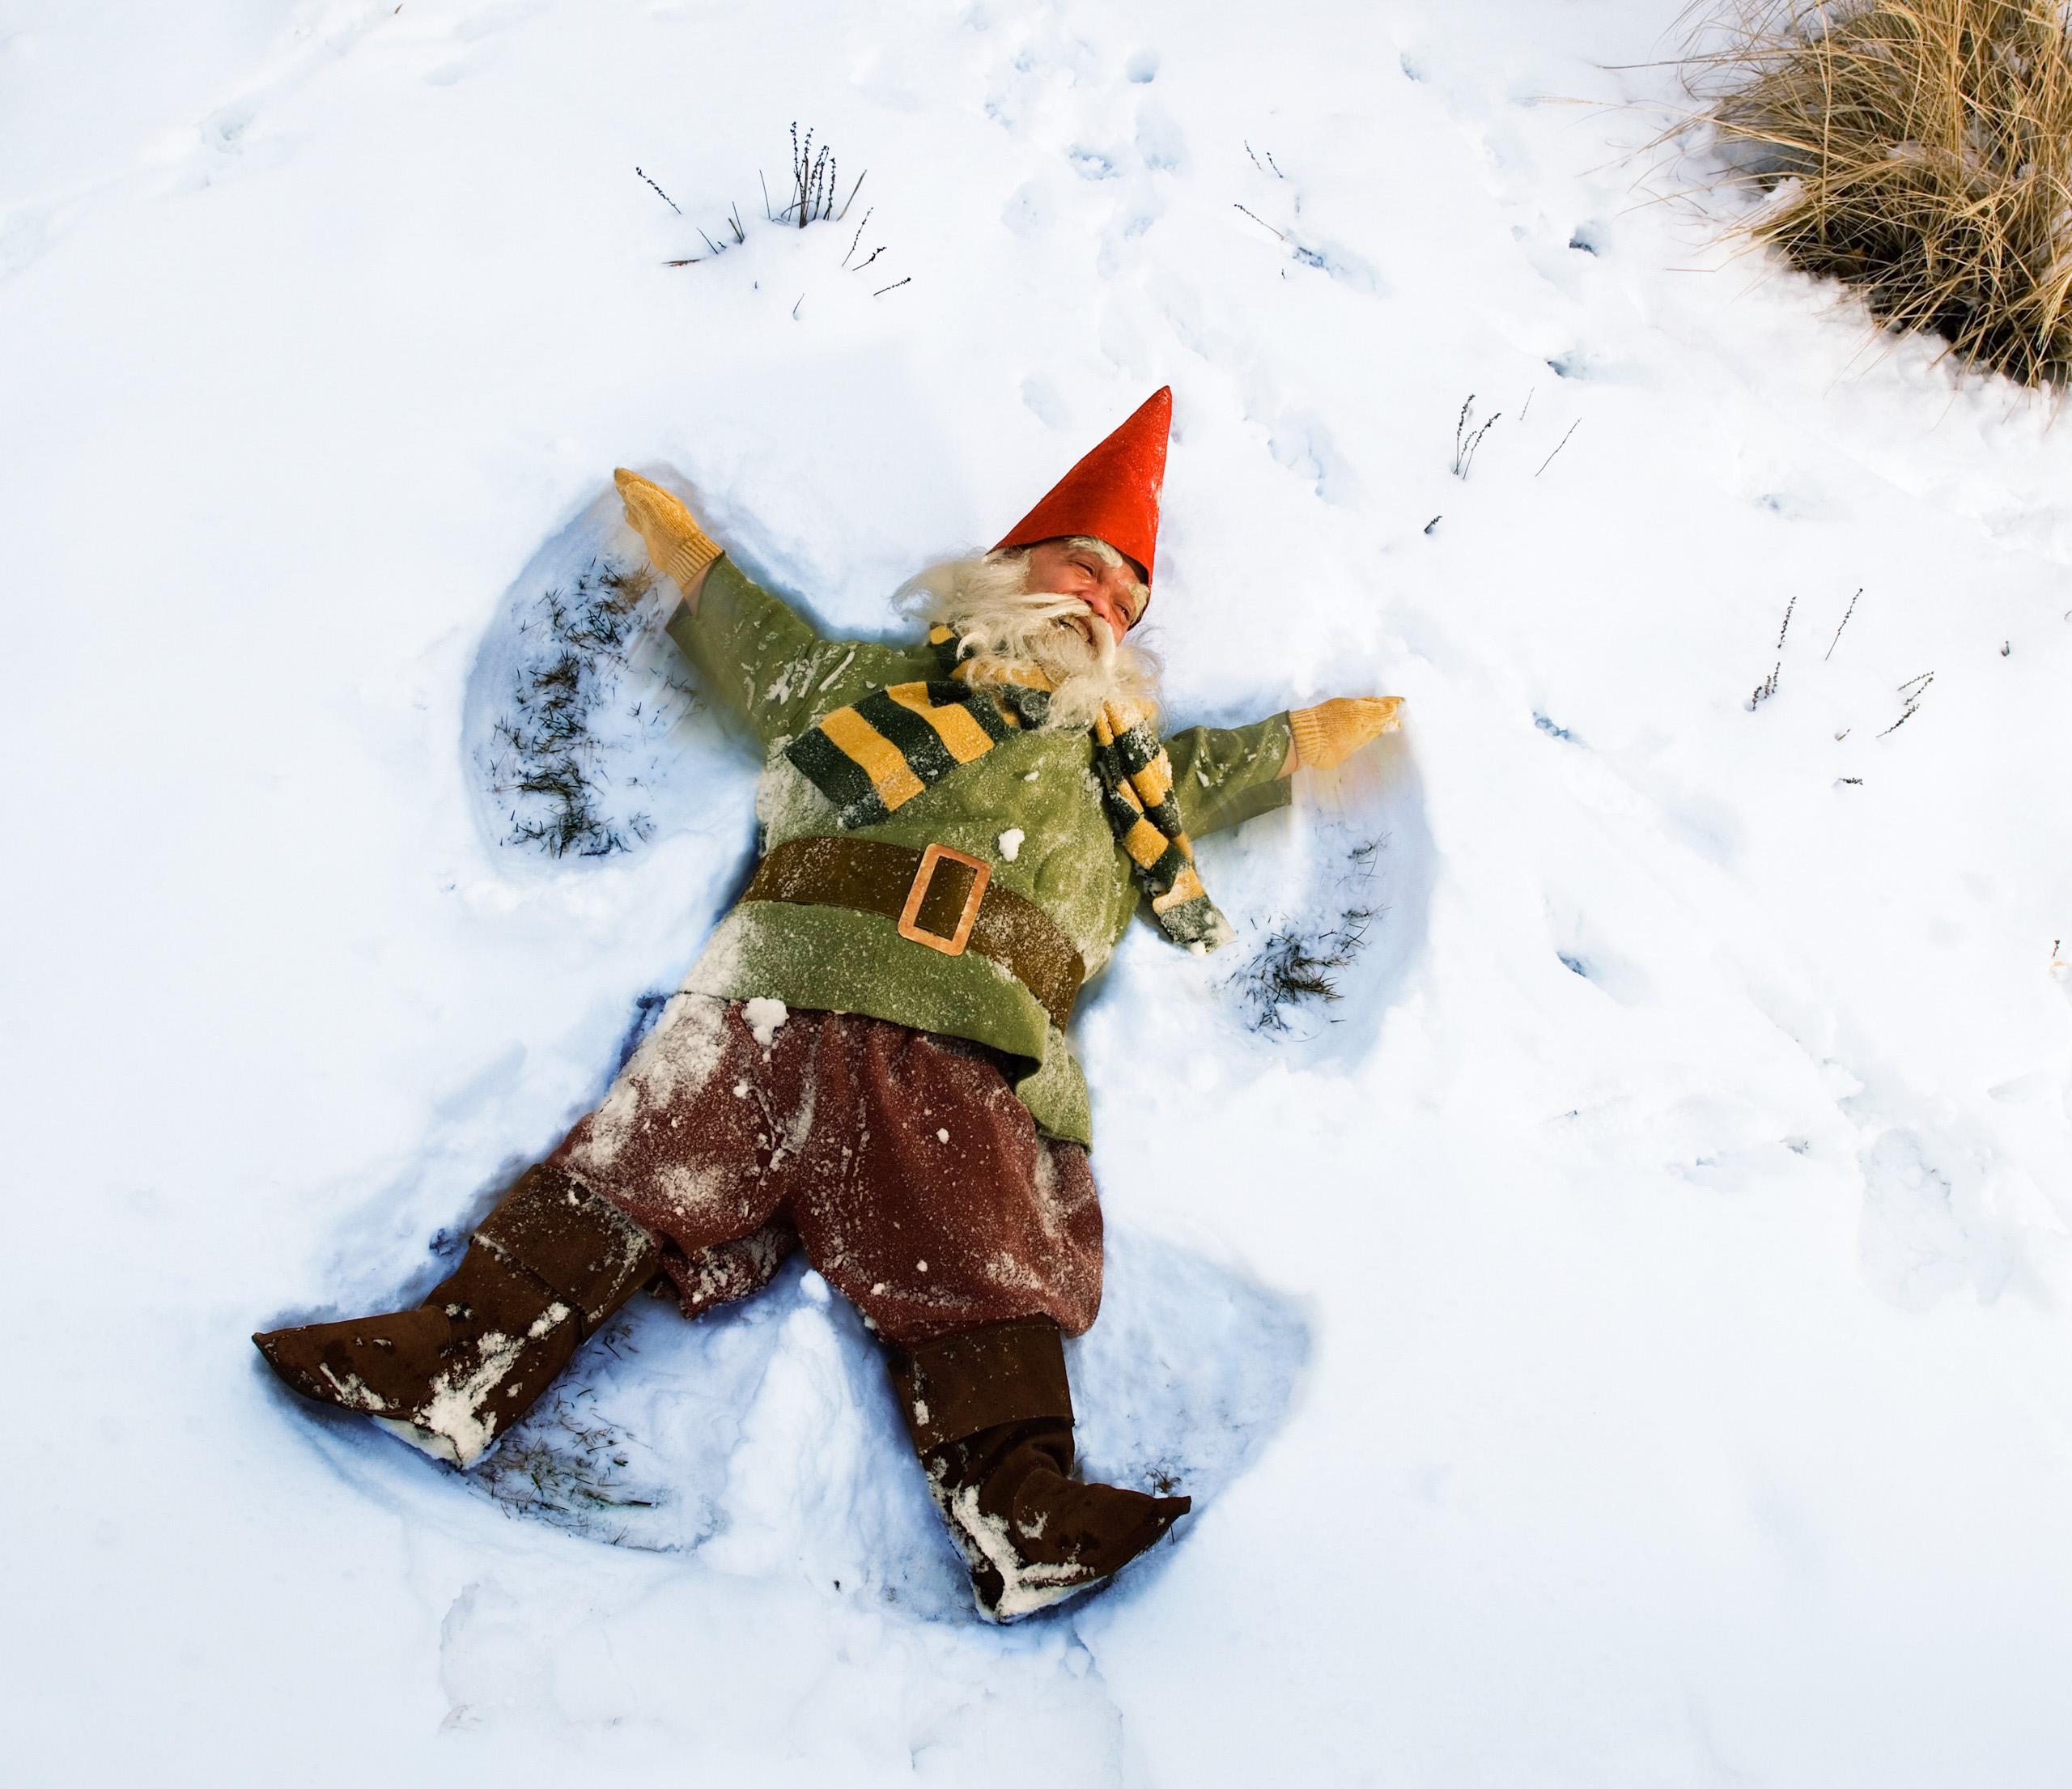 Snow Gnome - Photograph by Nick Vedros